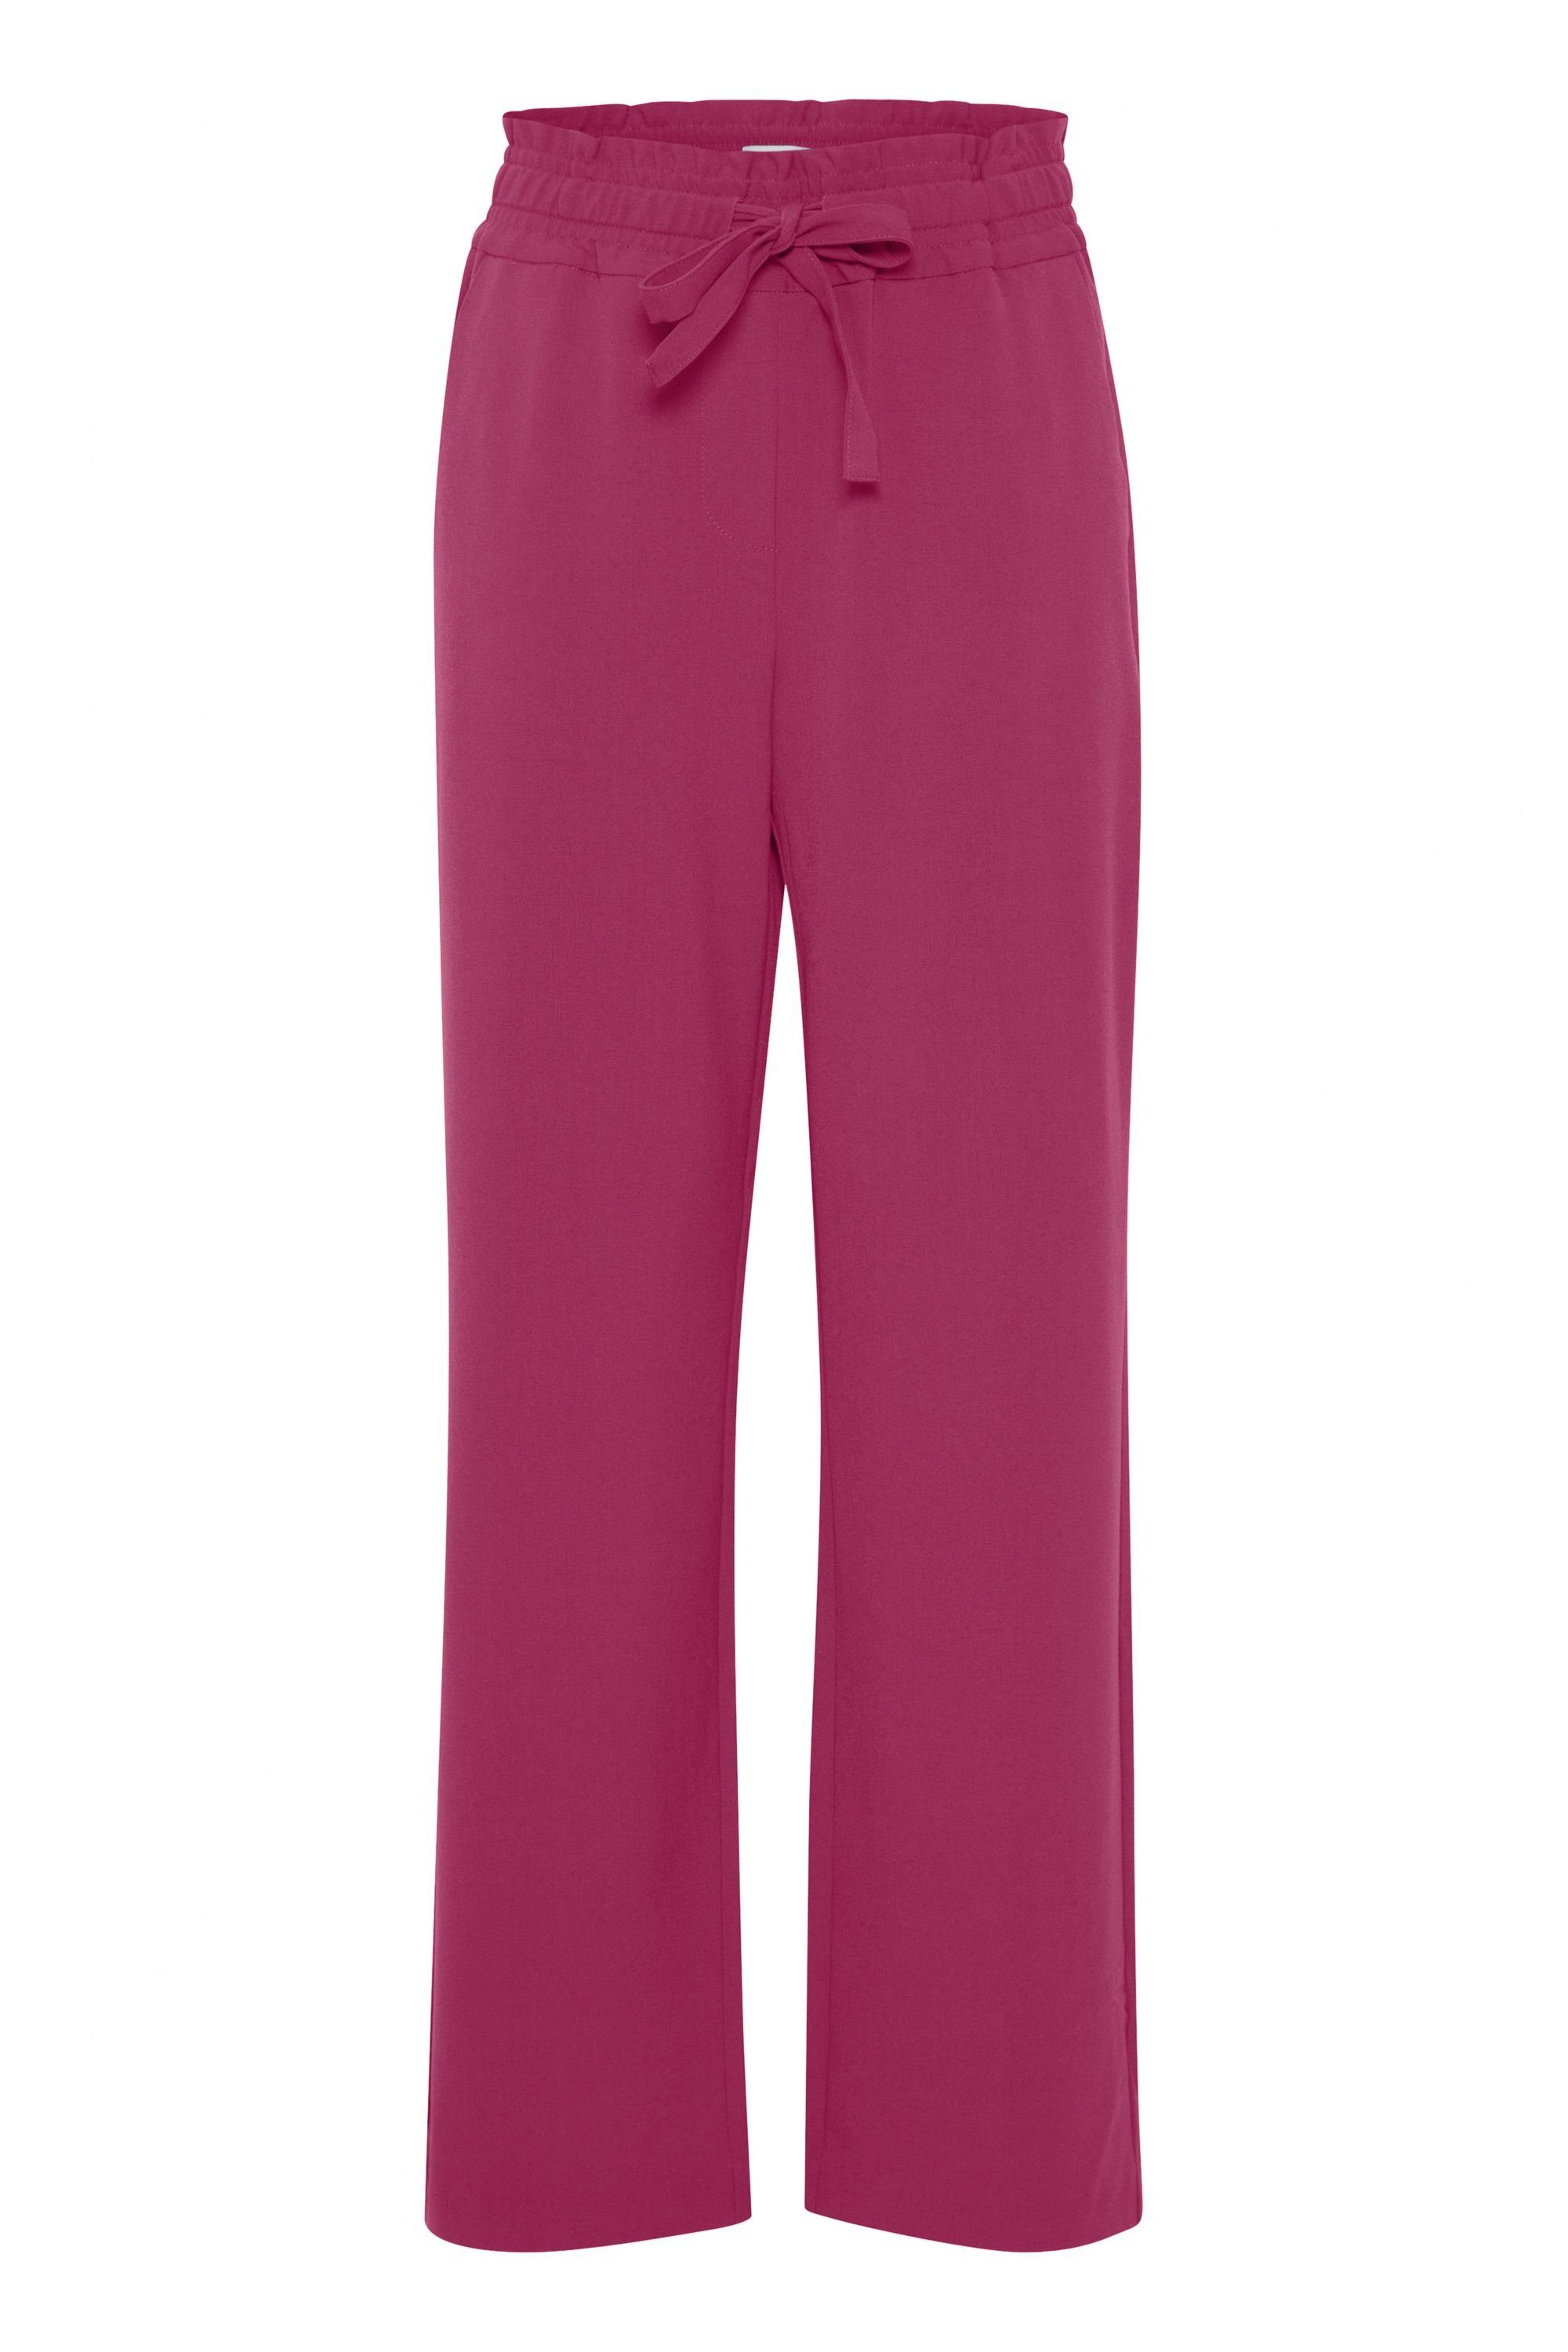 b.young Jogger Pants BYDANTA CASUAL PANT Y - 20813077 Fuchsia Red (182328)